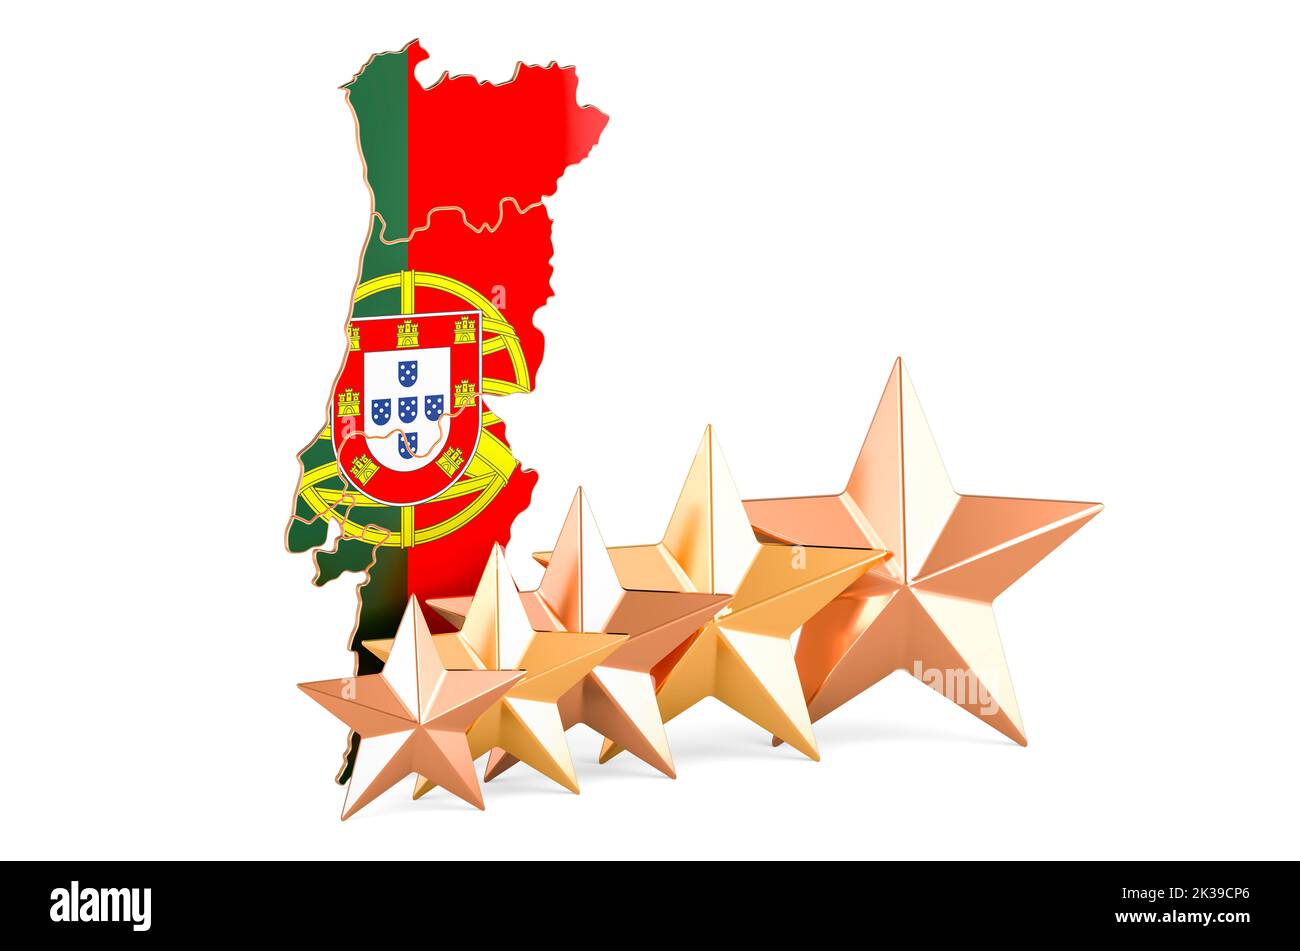 Portuguese map with five stars. Rating, quality, service in Portugal. 3D rendering isolated on white background Stock Photo